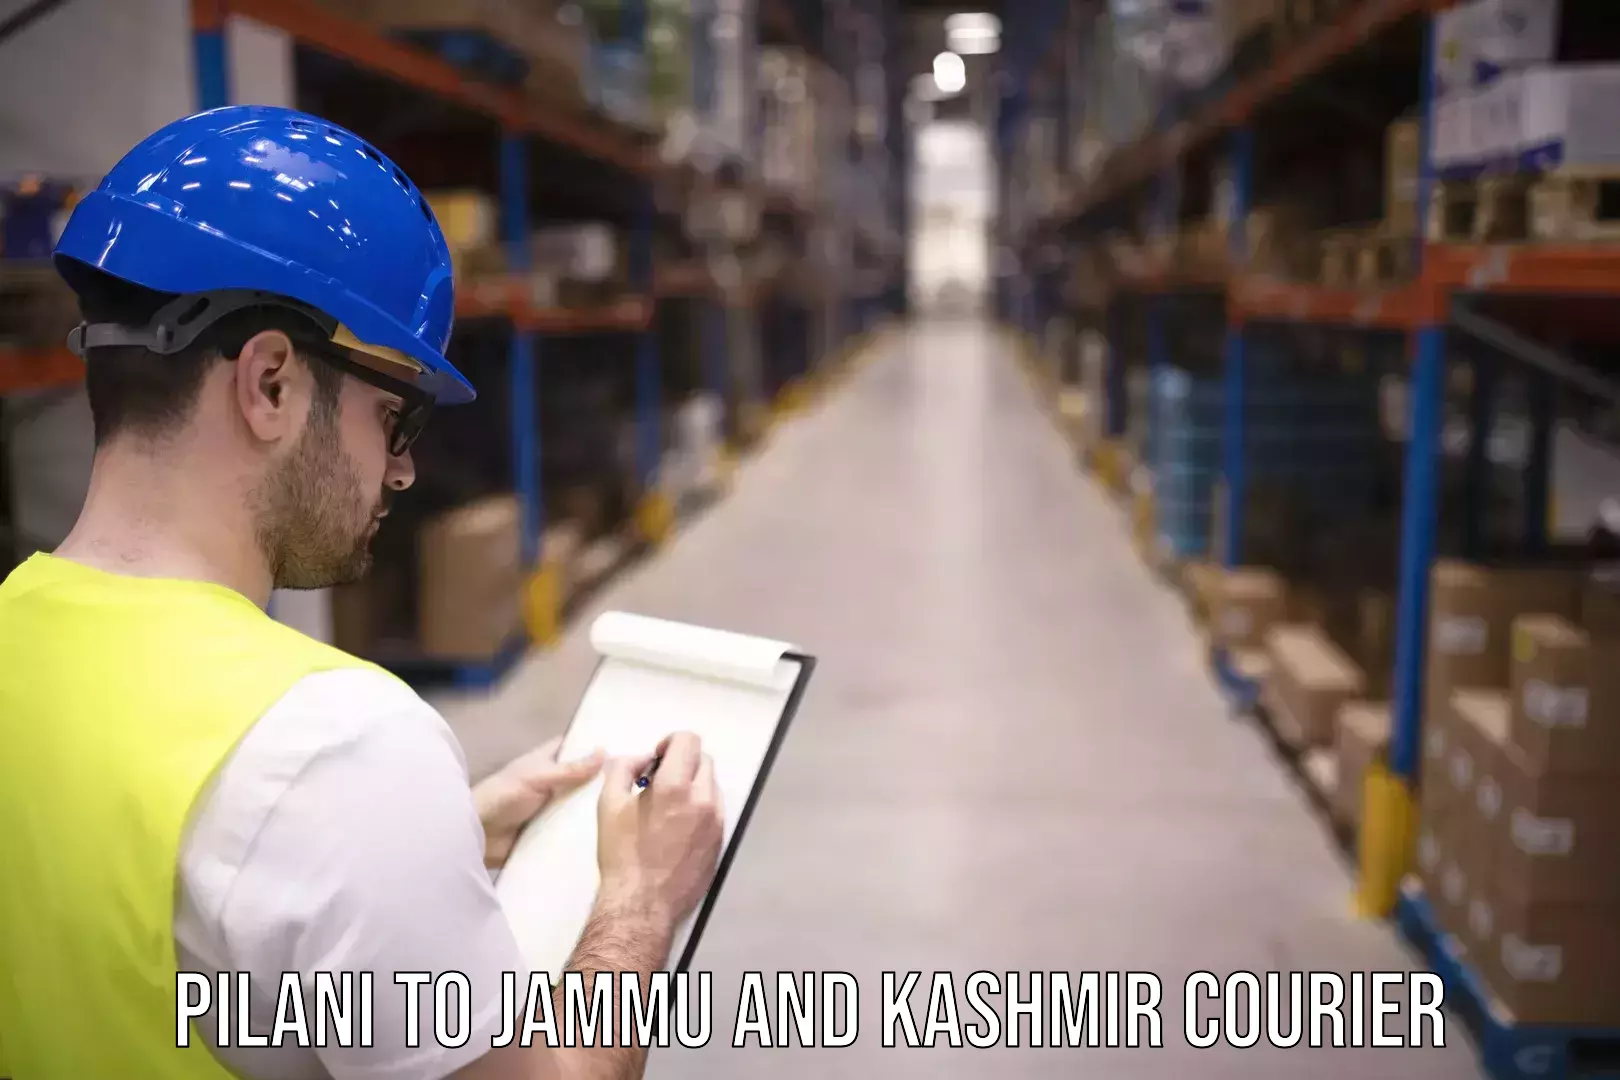 Local delivery service Pilani to Jammu and Kashmir